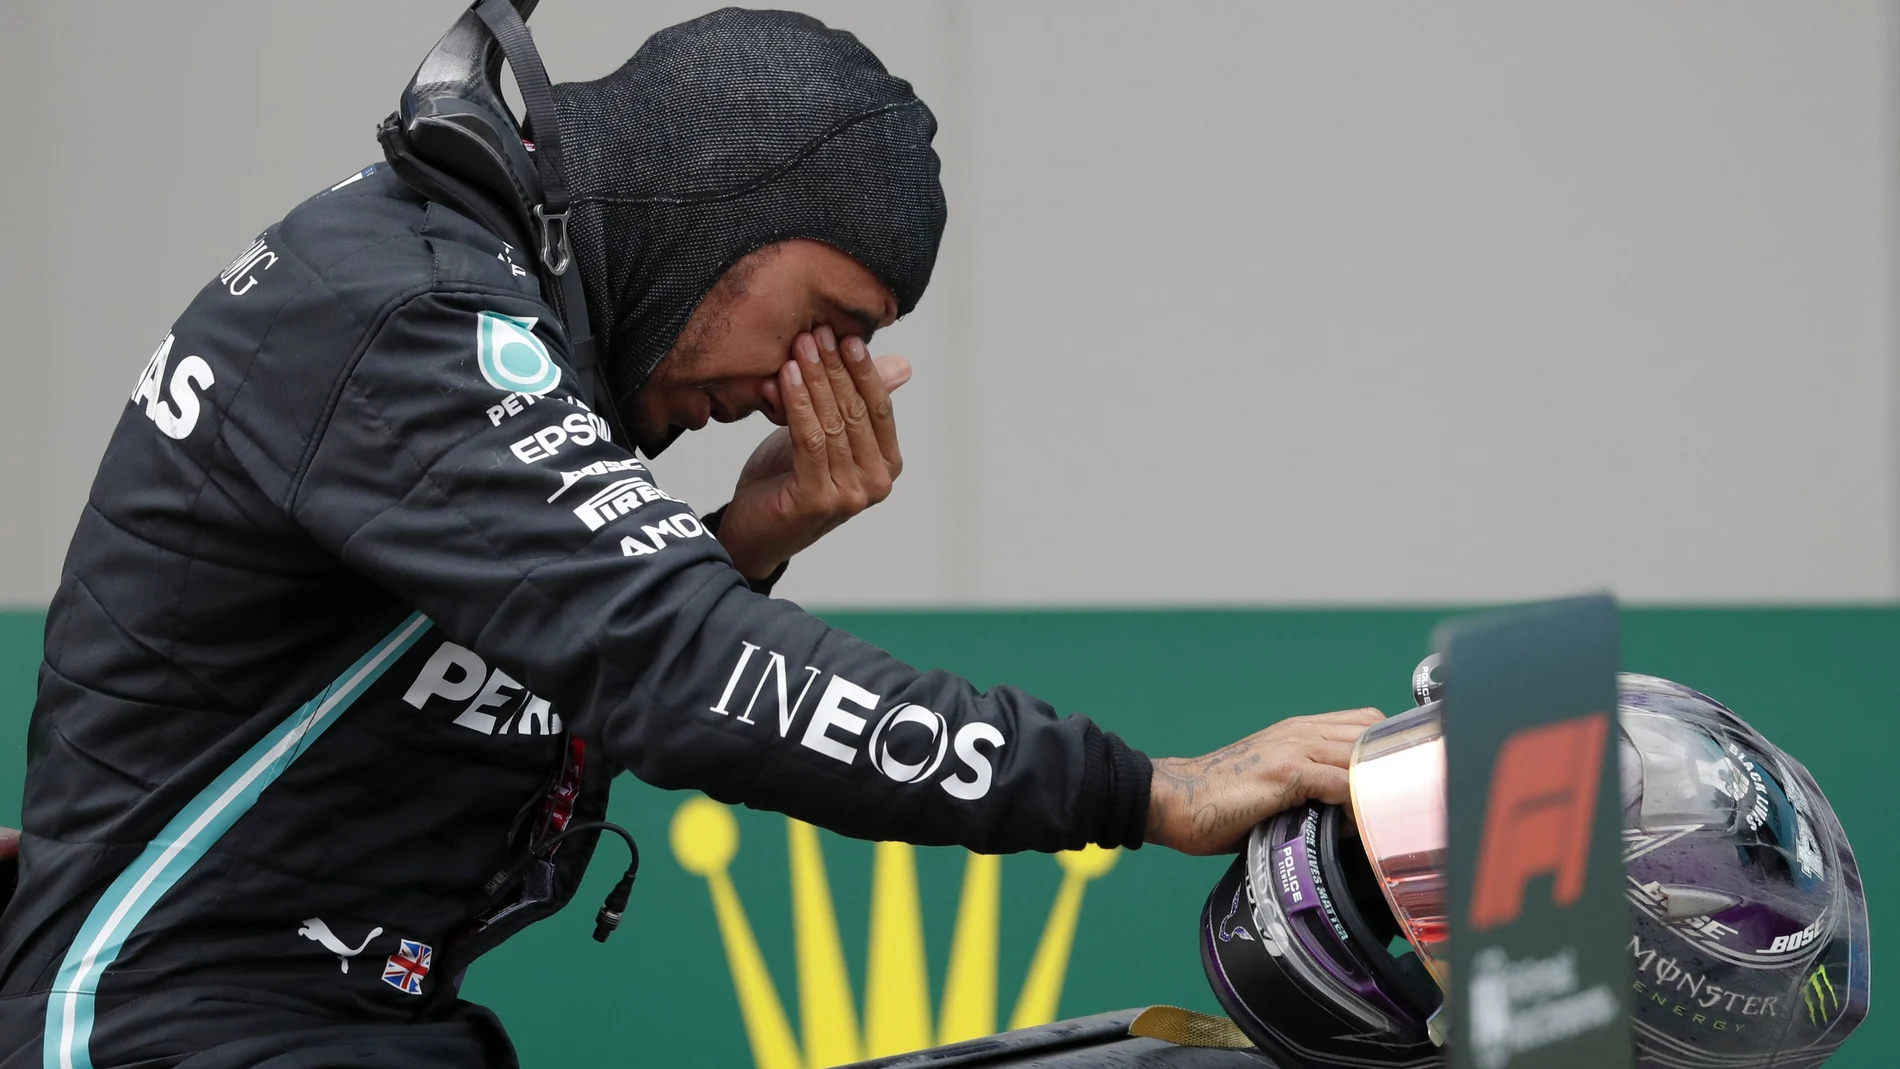 Mercedes driver Lewis Hamilton of Britain reacts after winning the Turkish Formula One Grand Prix at the Istanbul Park circuit racetrack in Istanbul, Sunday, Nov. 15, 2020. (Murad Sezer/Pool via AP)